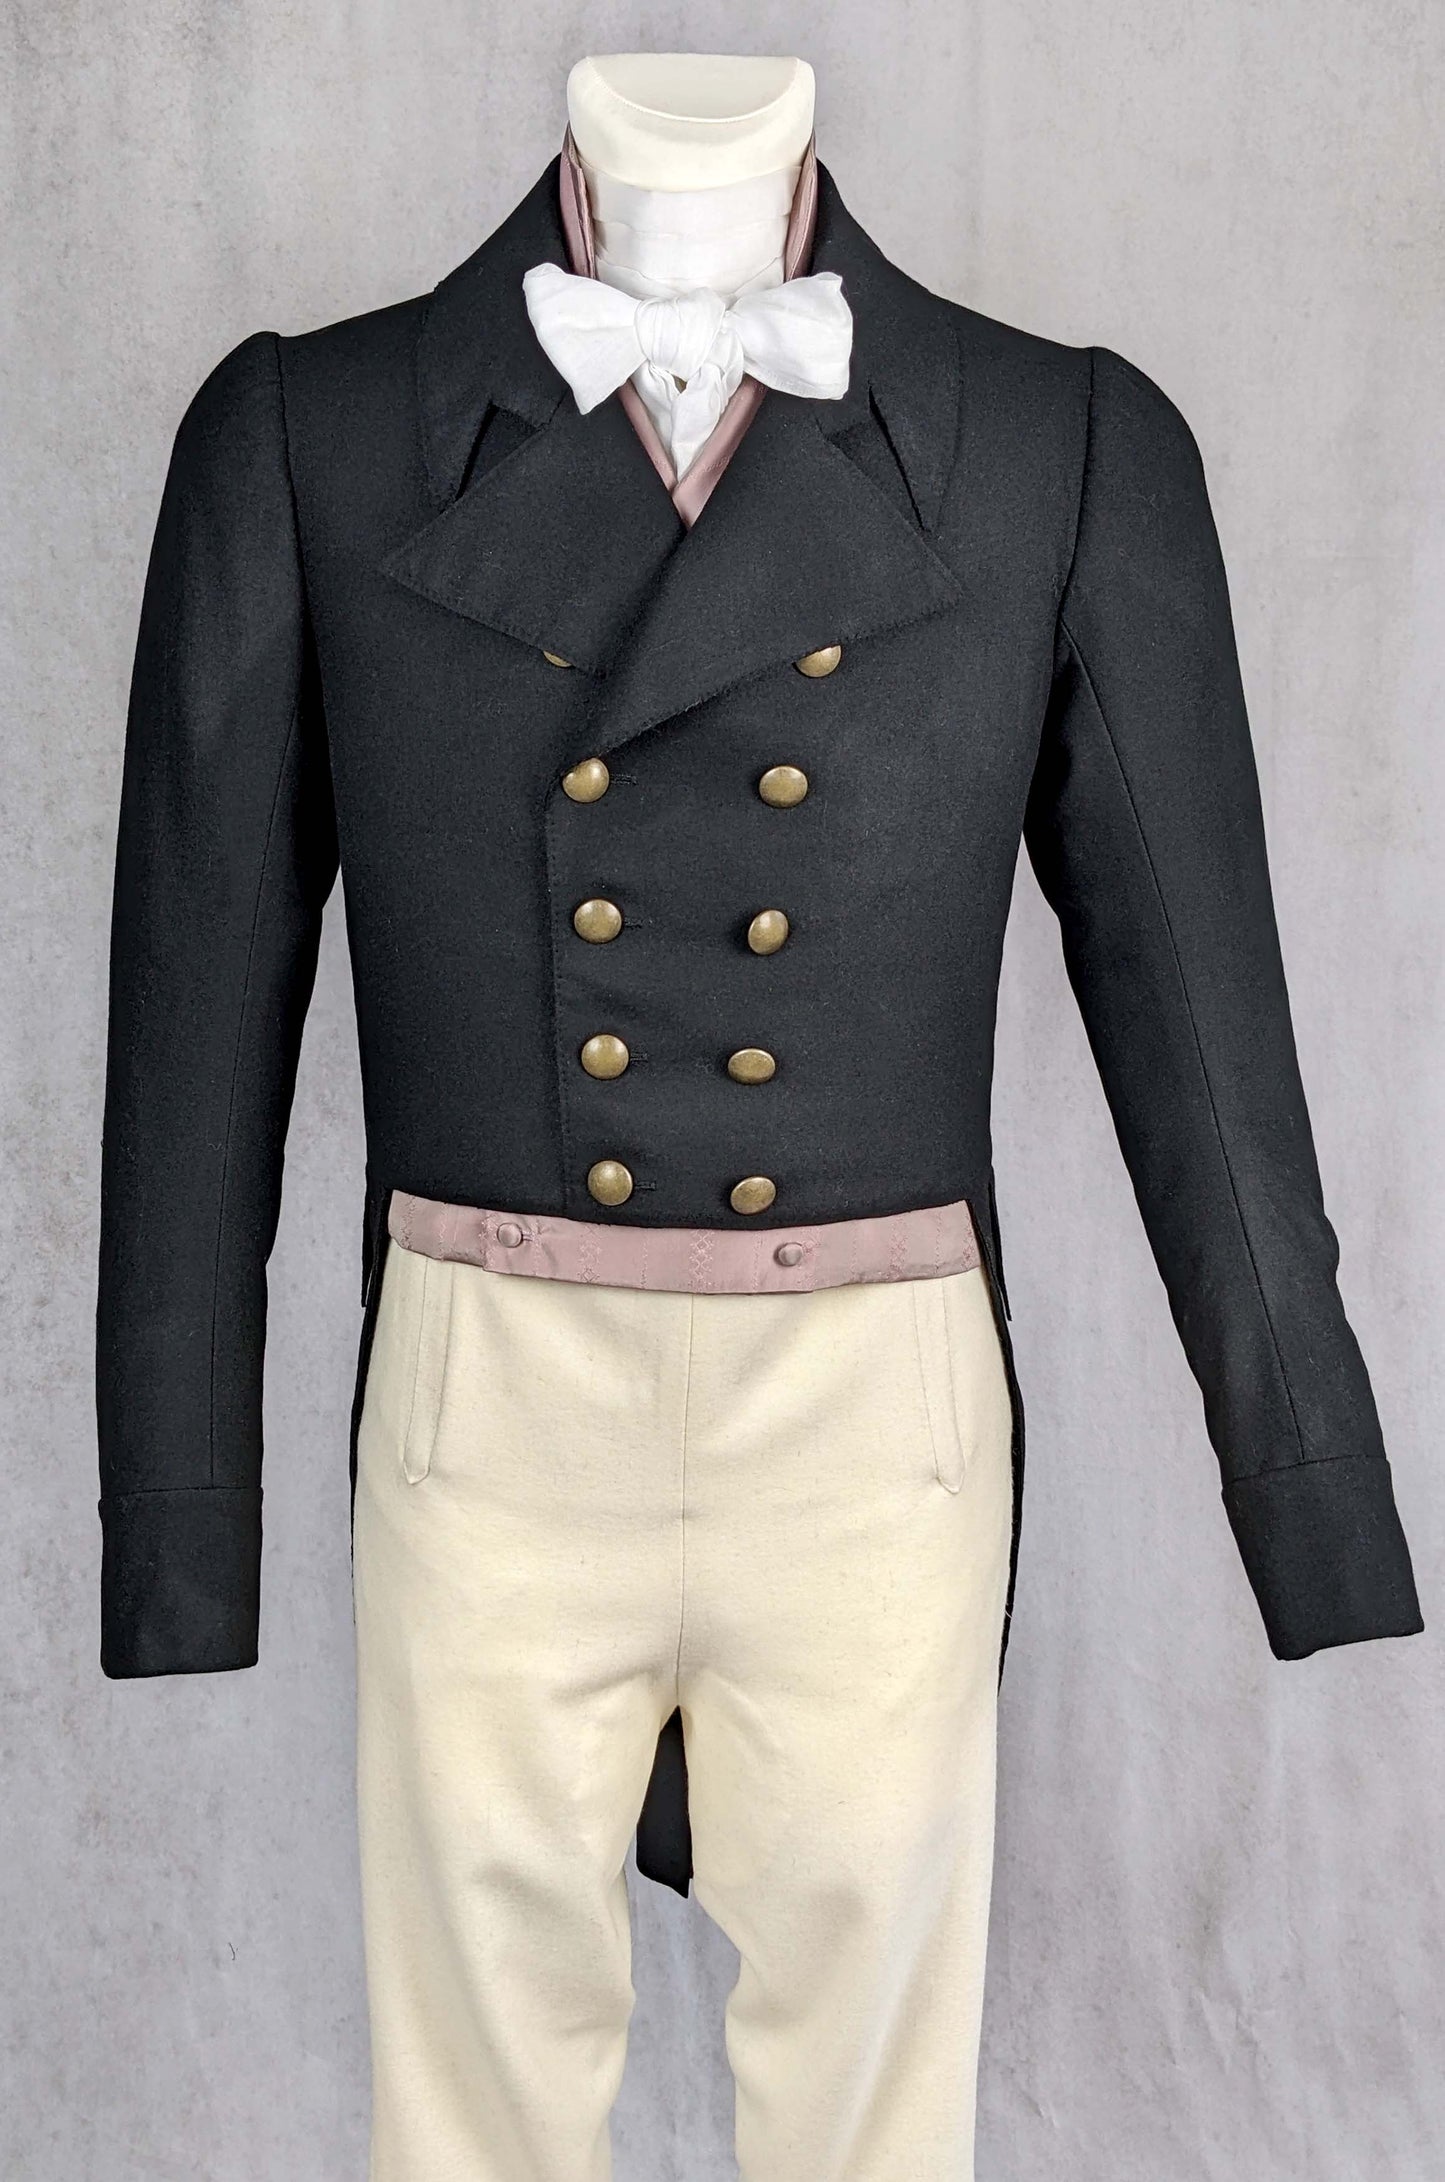 #0322 Empire Regency Men´s Tailcoat from 1800-1820 Sewing Pattern Size US 34-56 (EU 44-66) PDF Download